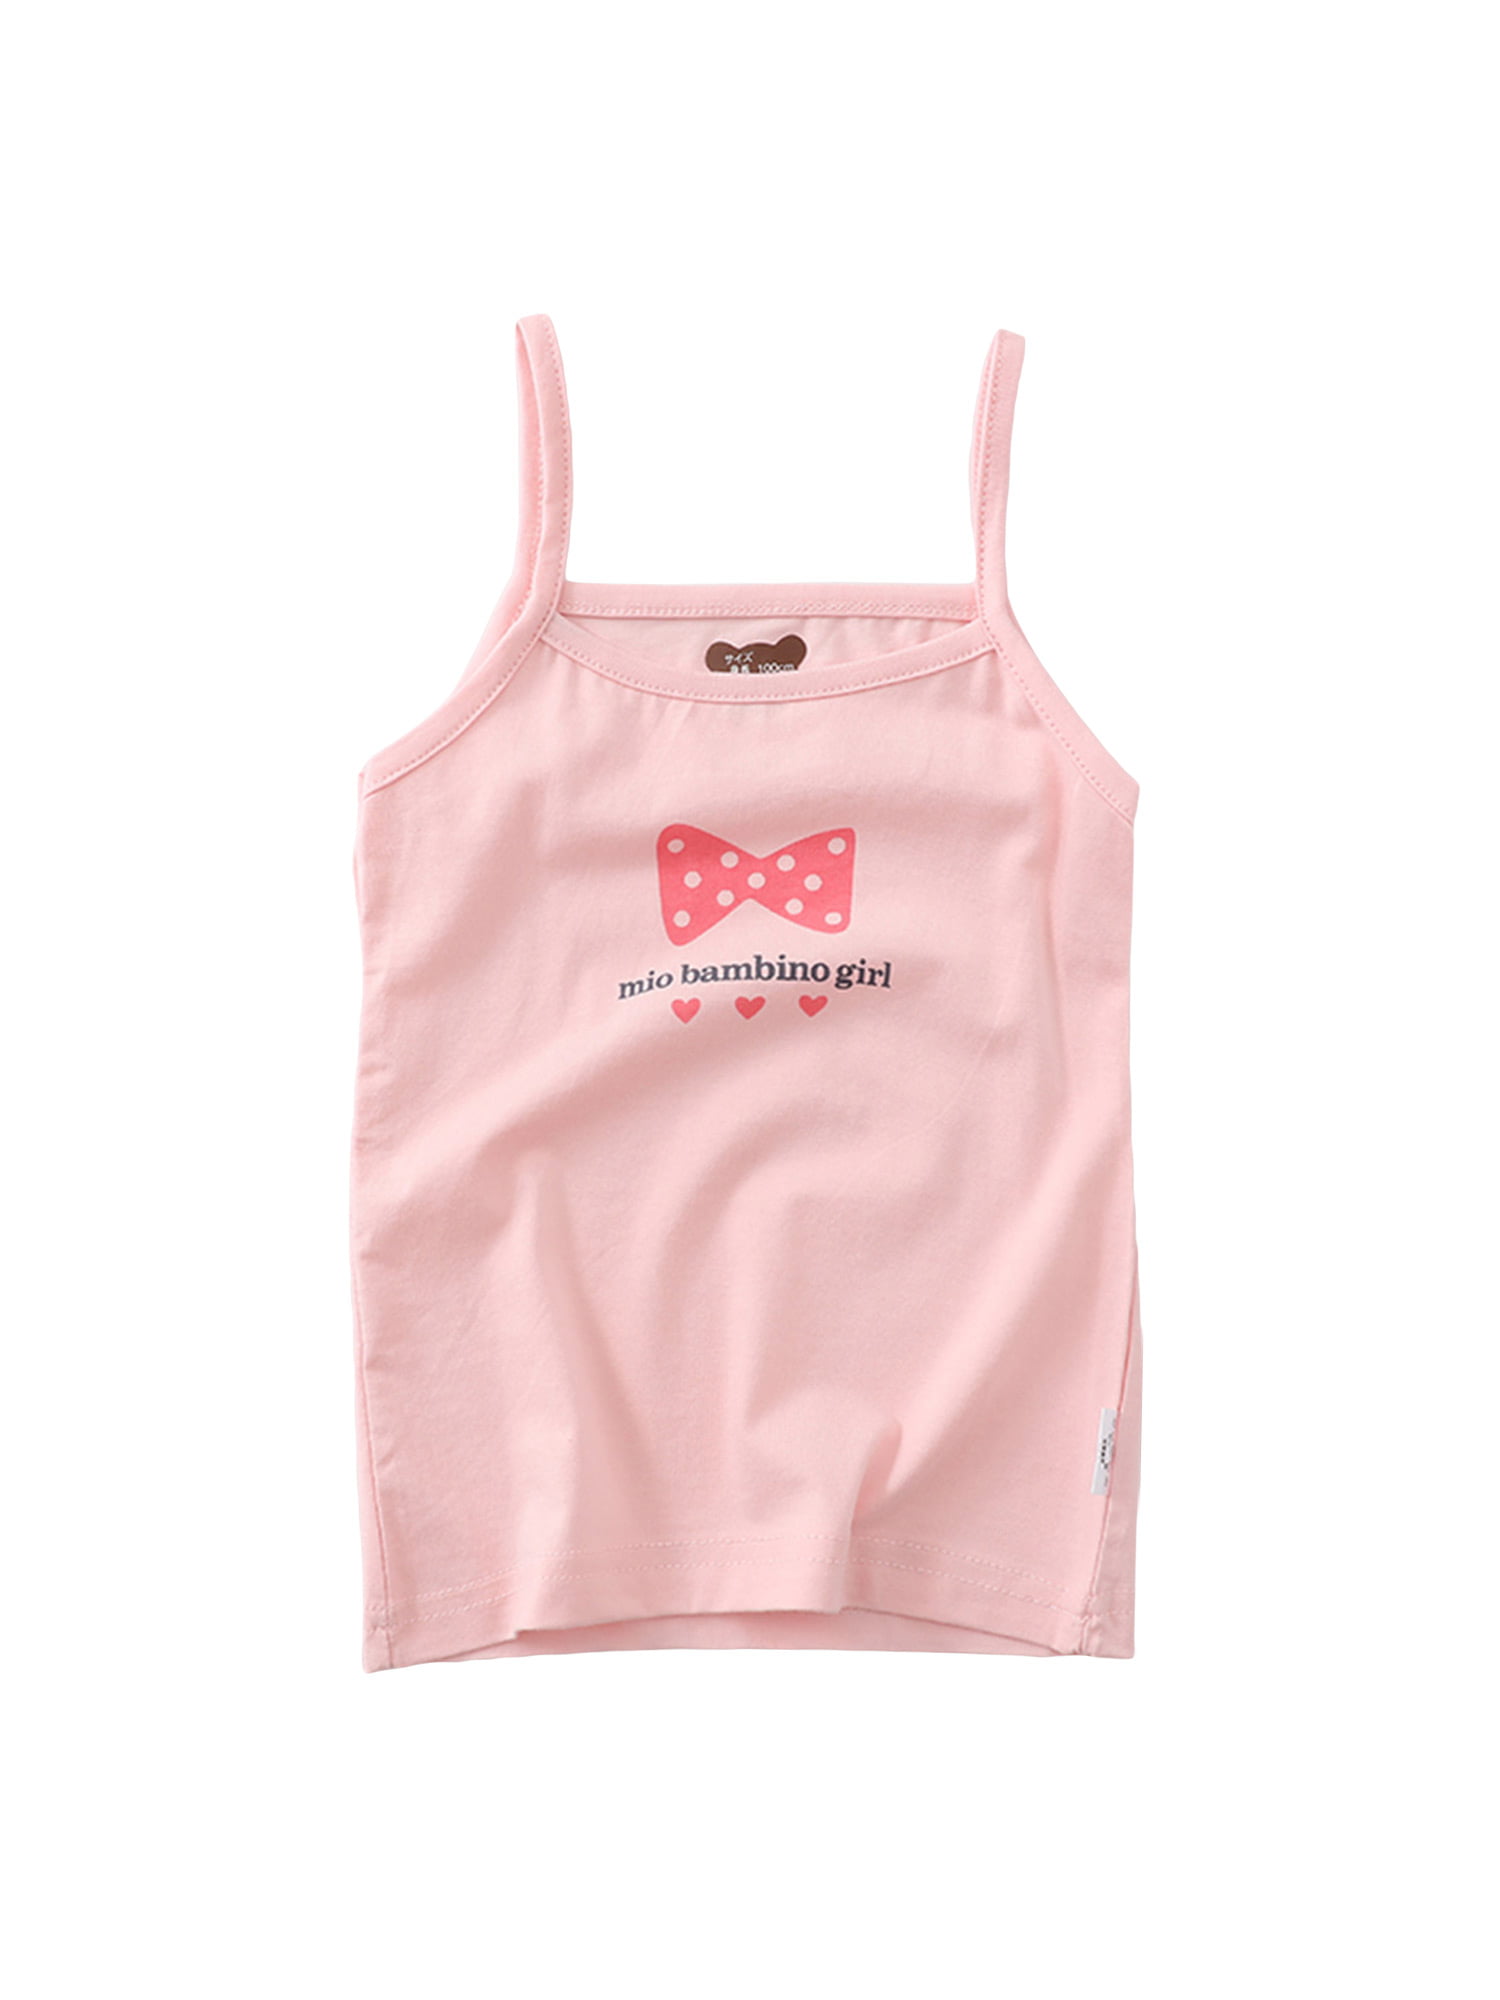 Girls Vests Comfortable and Soft on The Skin Cotton Pack of 5 Sleeveless Spaghetti Strap Tops with Different Motifs